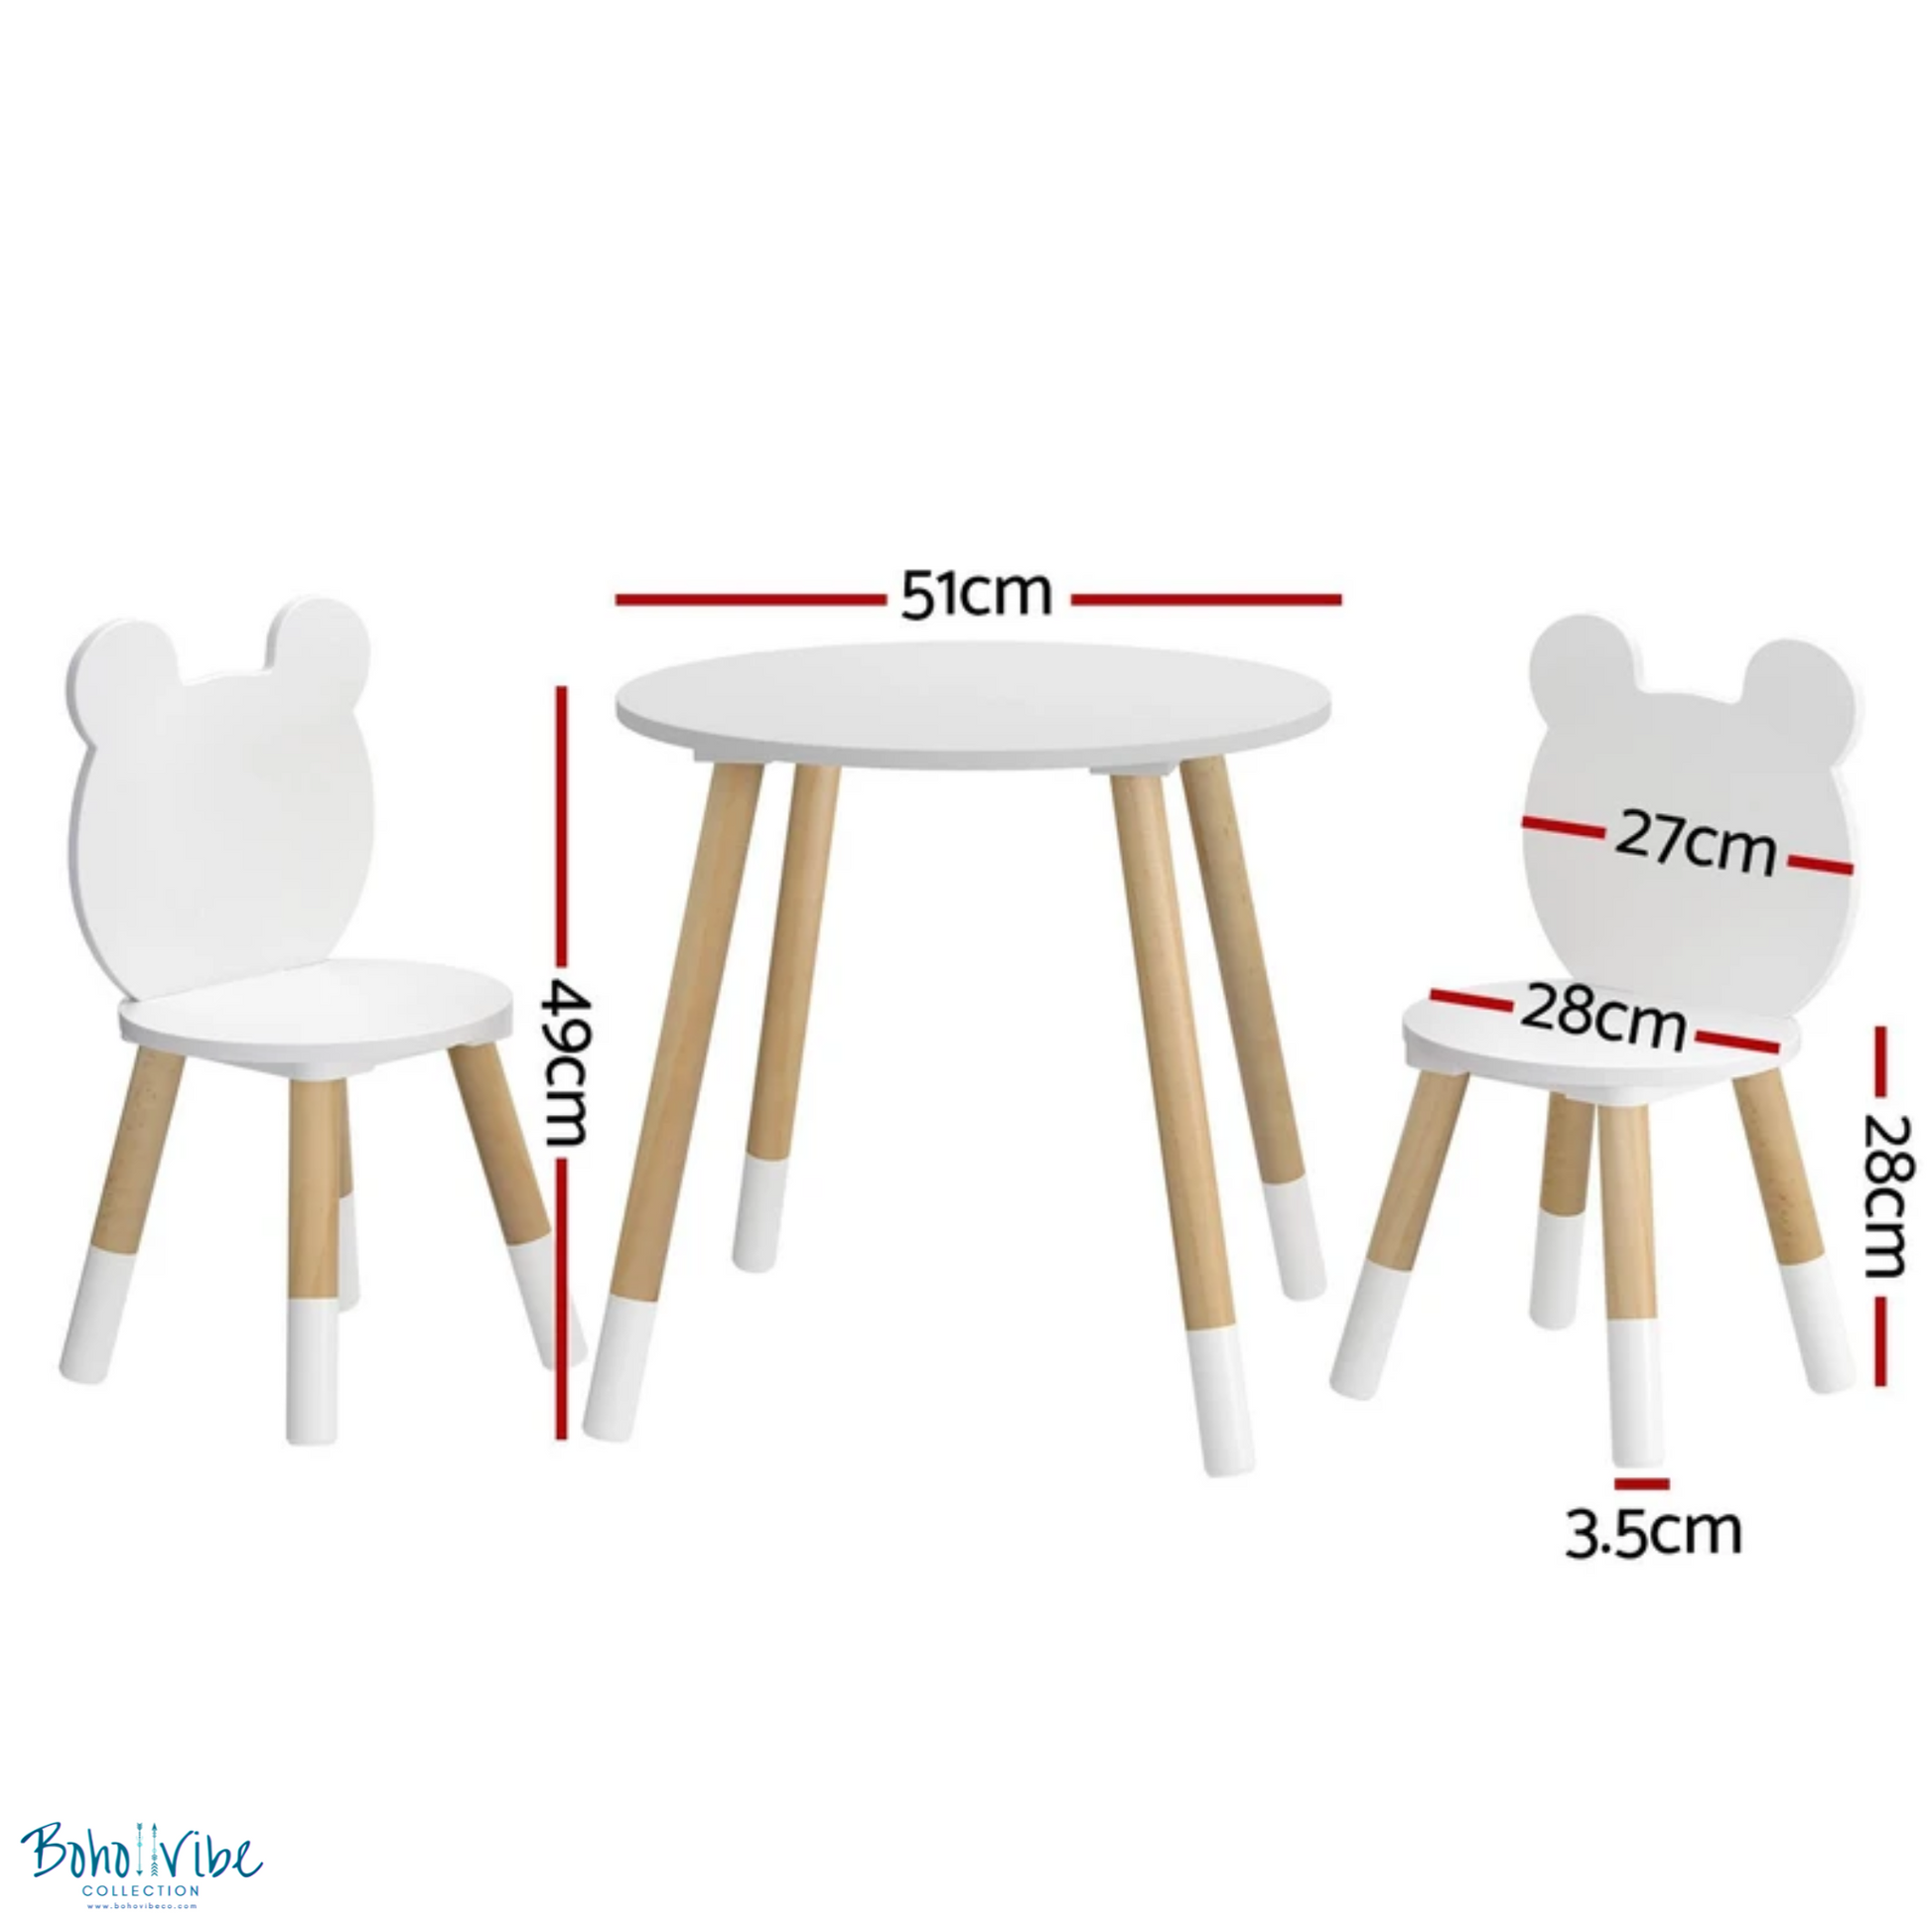 3-Piece Kids Table Chairs Set with White Ears, Play Study Desk ↡